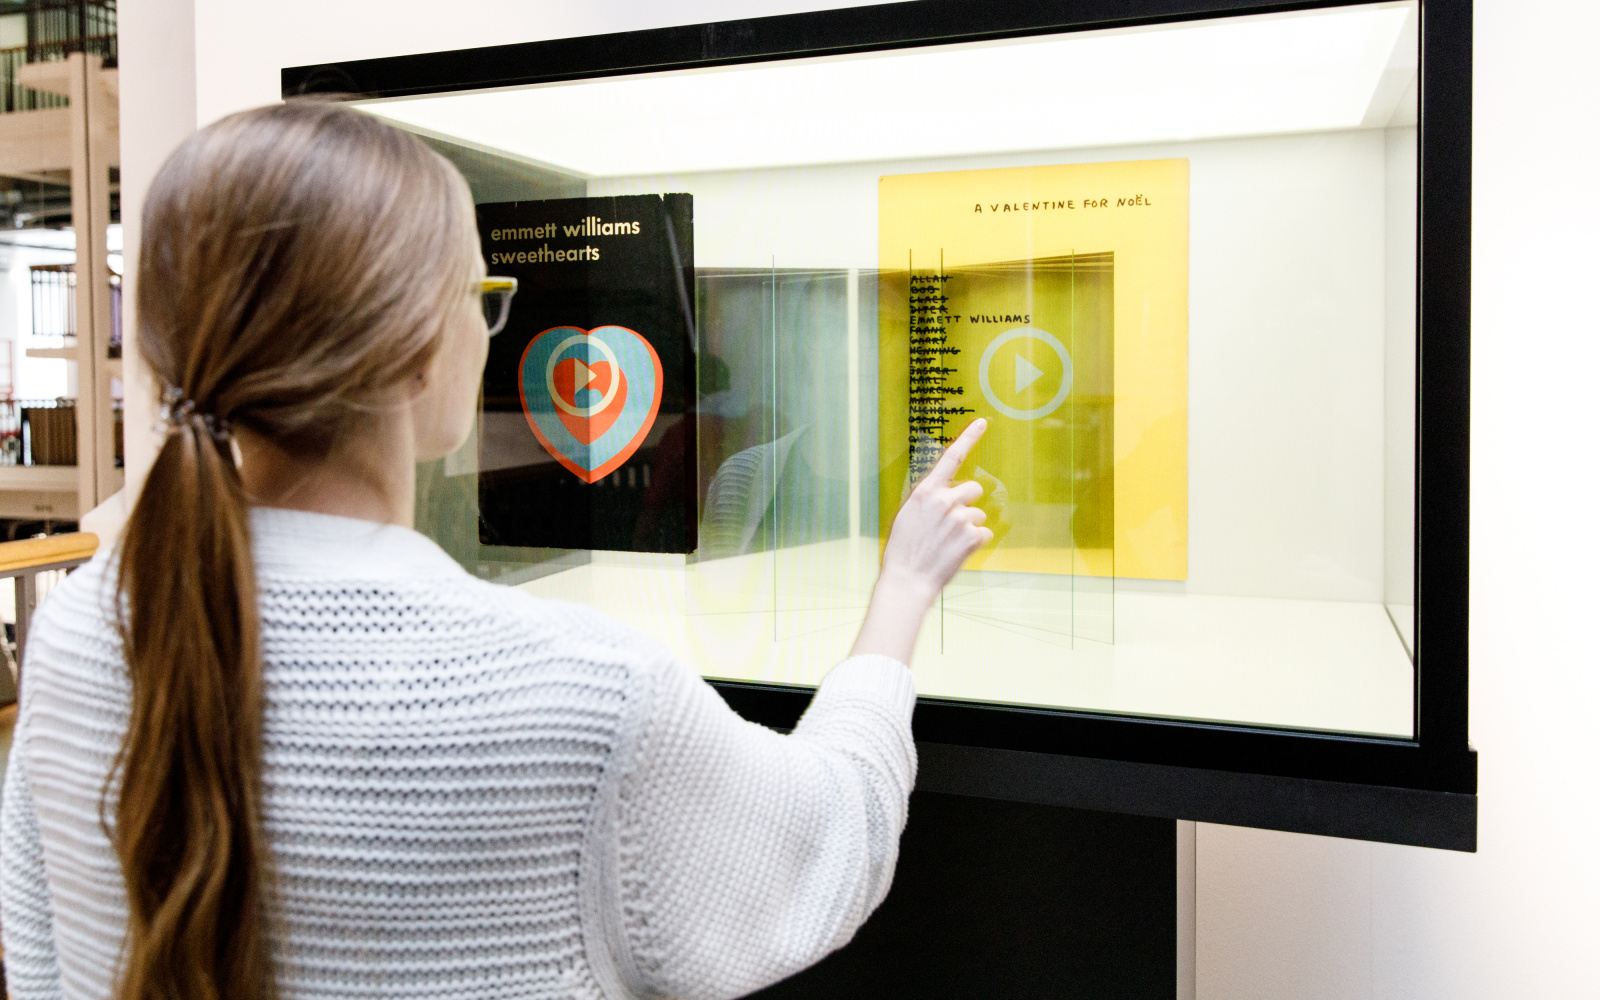 A woman stands in front of a glass box in which she can select and read books with her fingers.